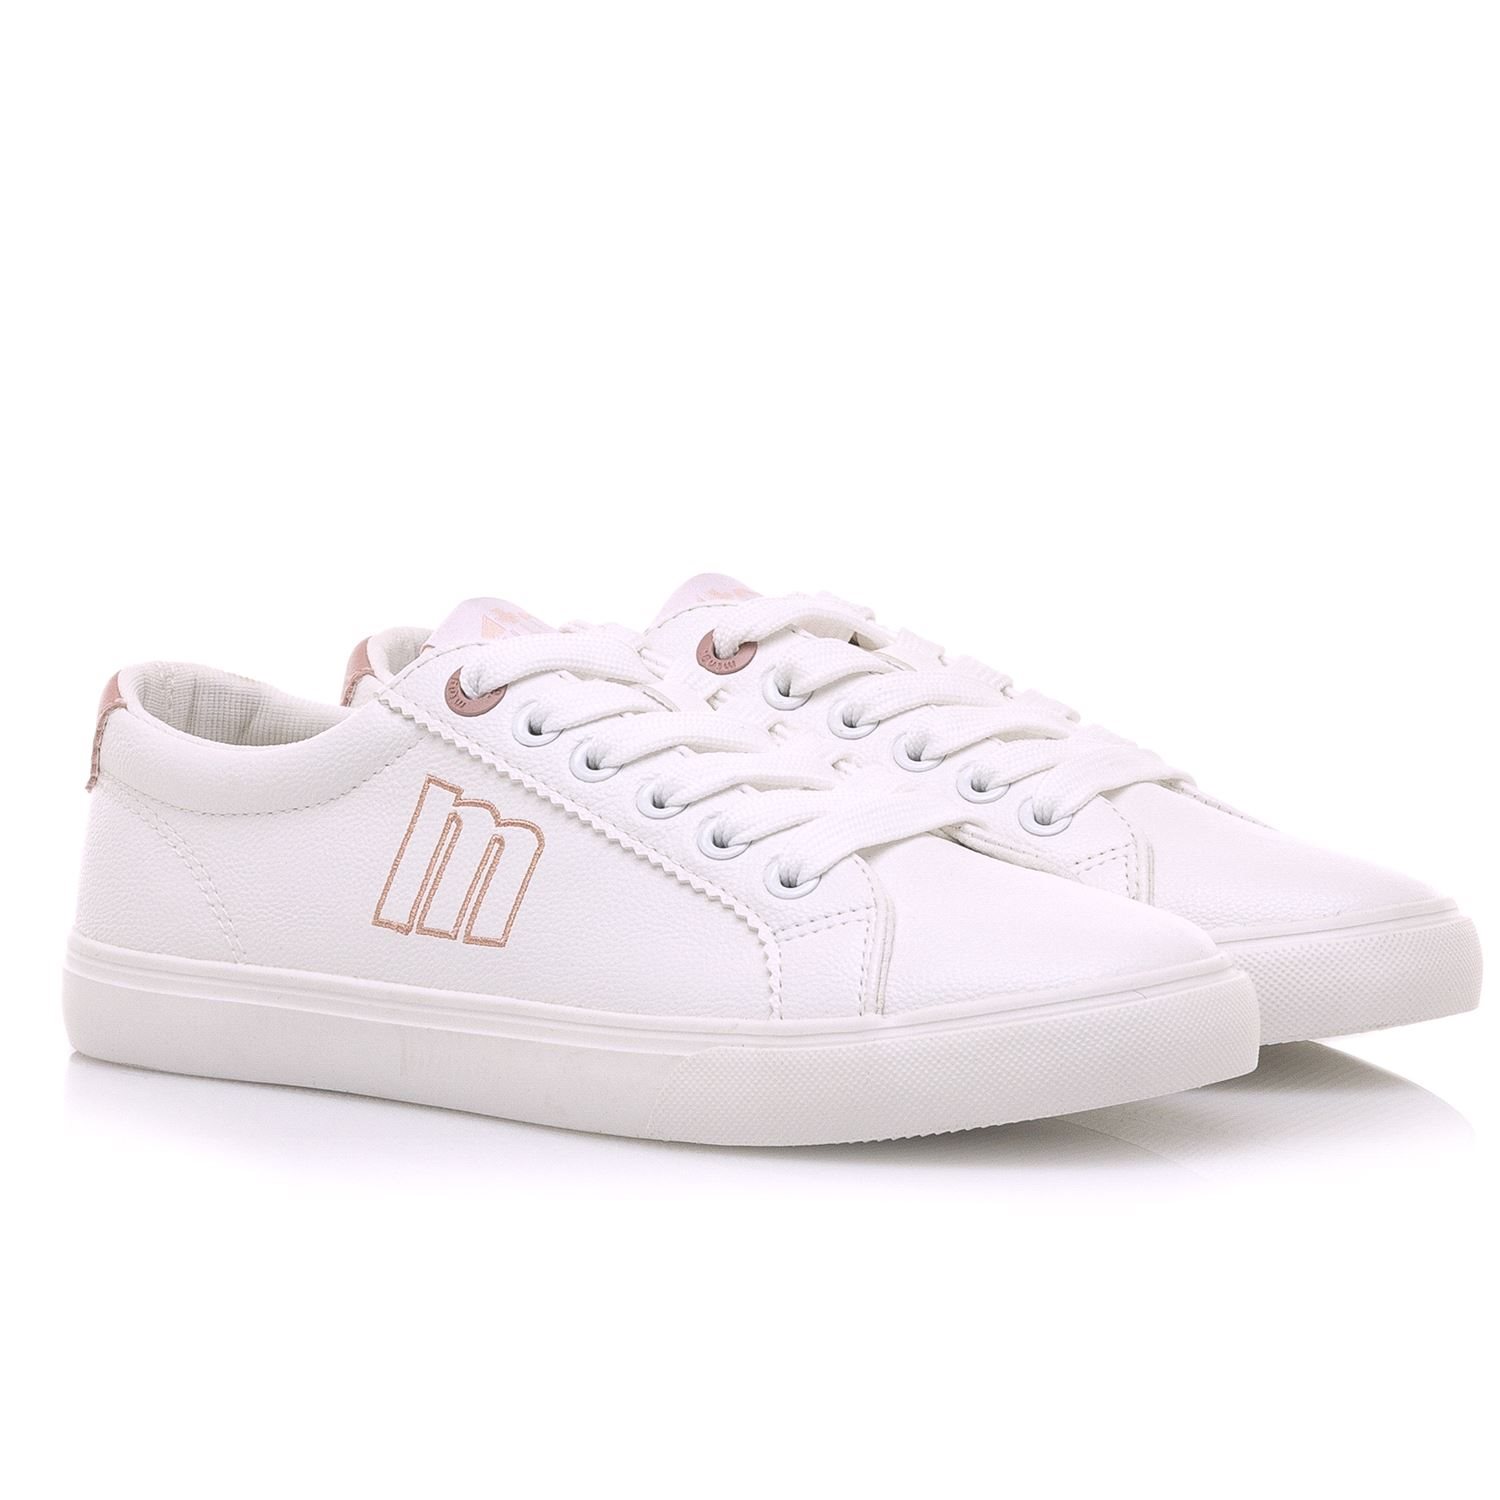 Sneakers Mulher Mtng Aria Branco